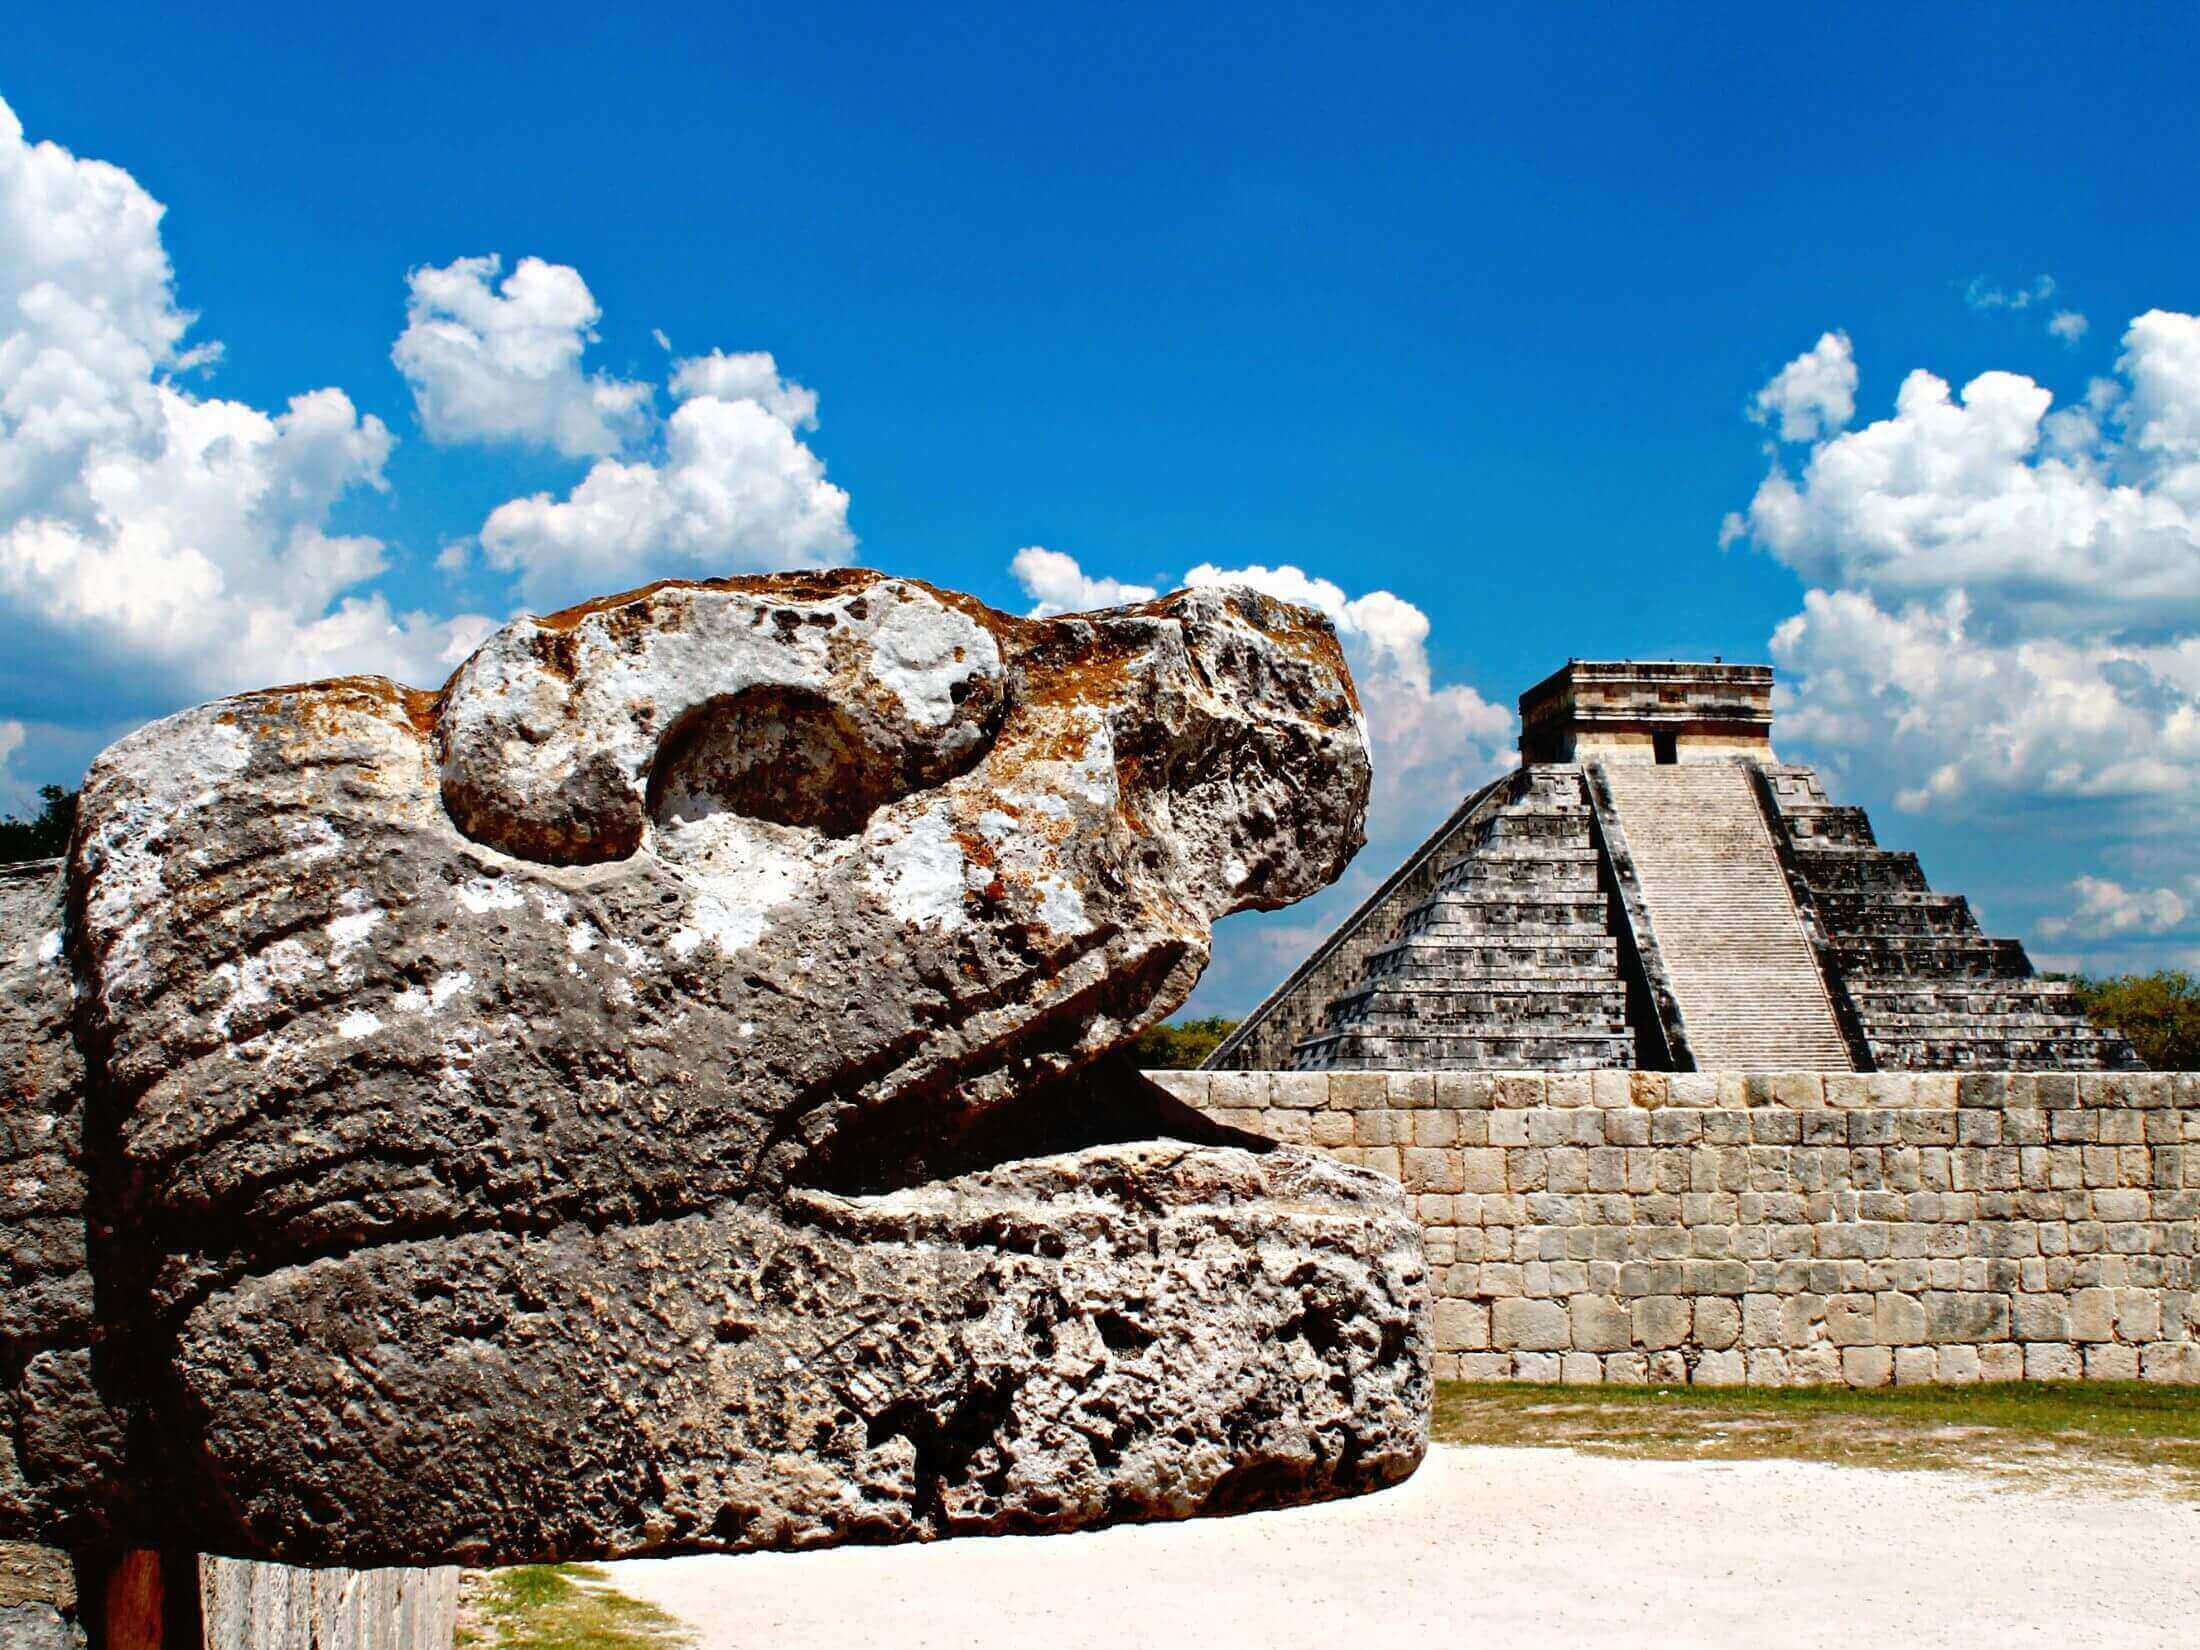 Some Facts About Chichen Itza